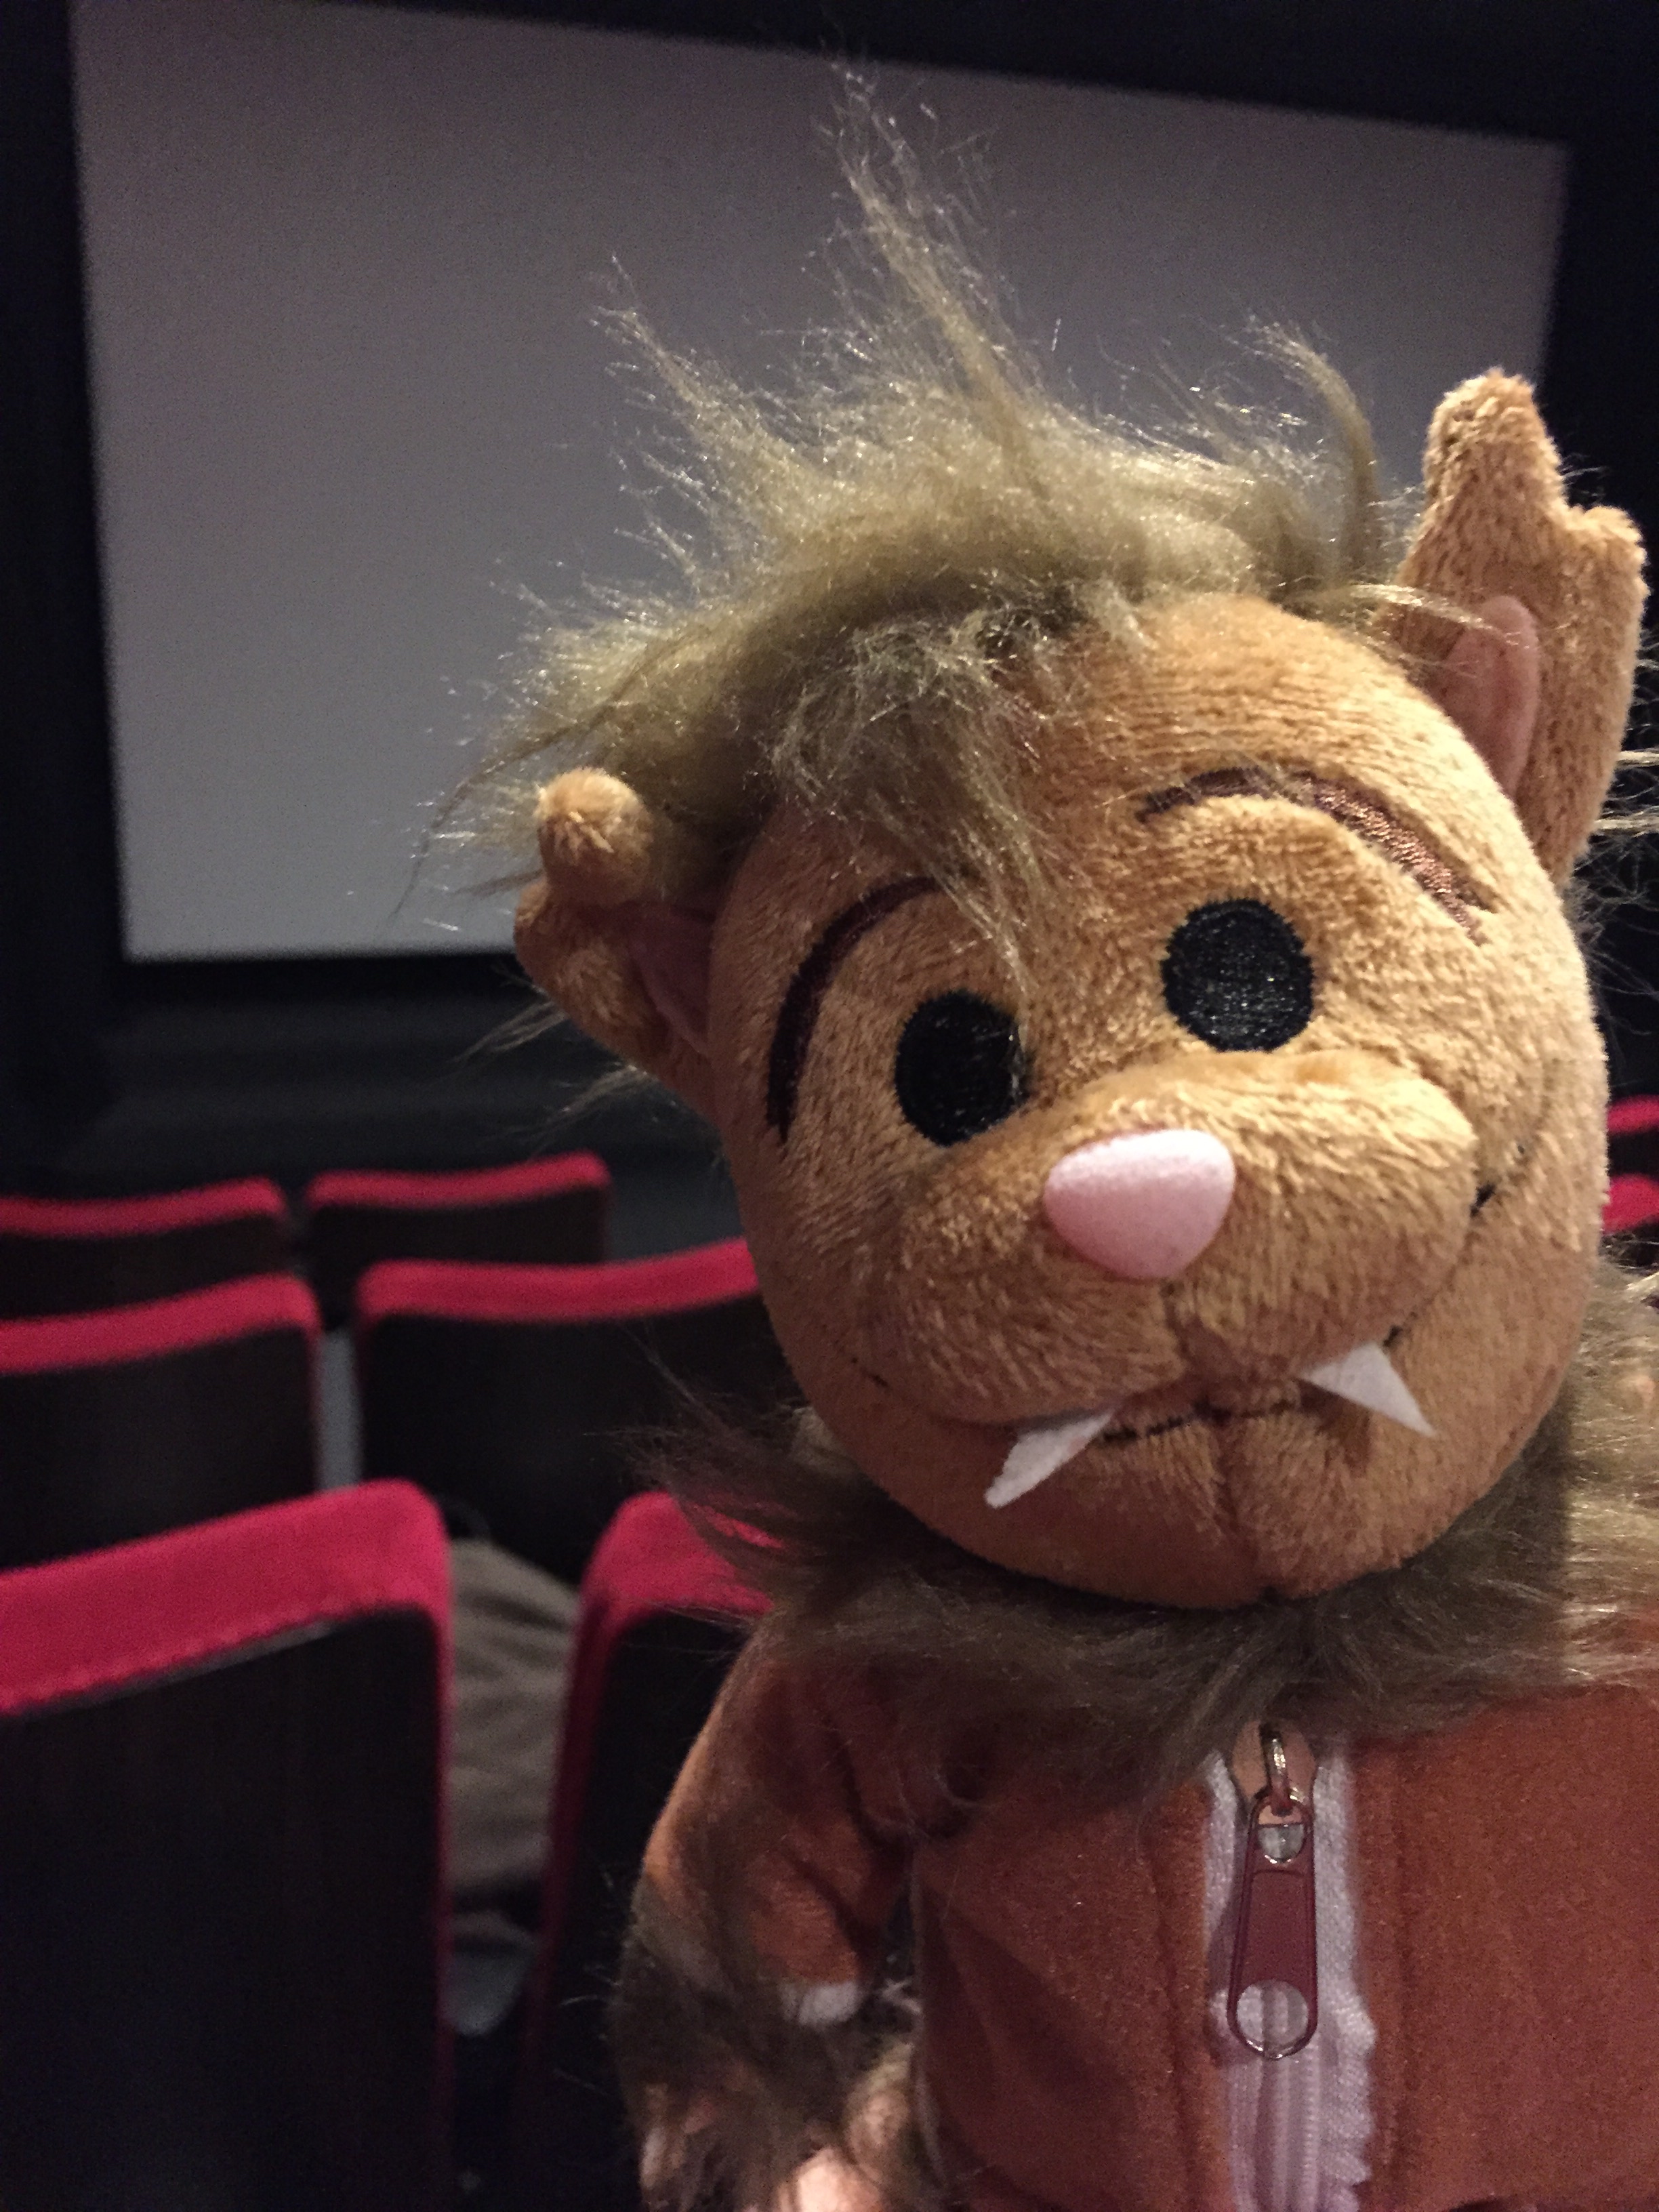 Photo of a Wolfie plush toy in a movie theater